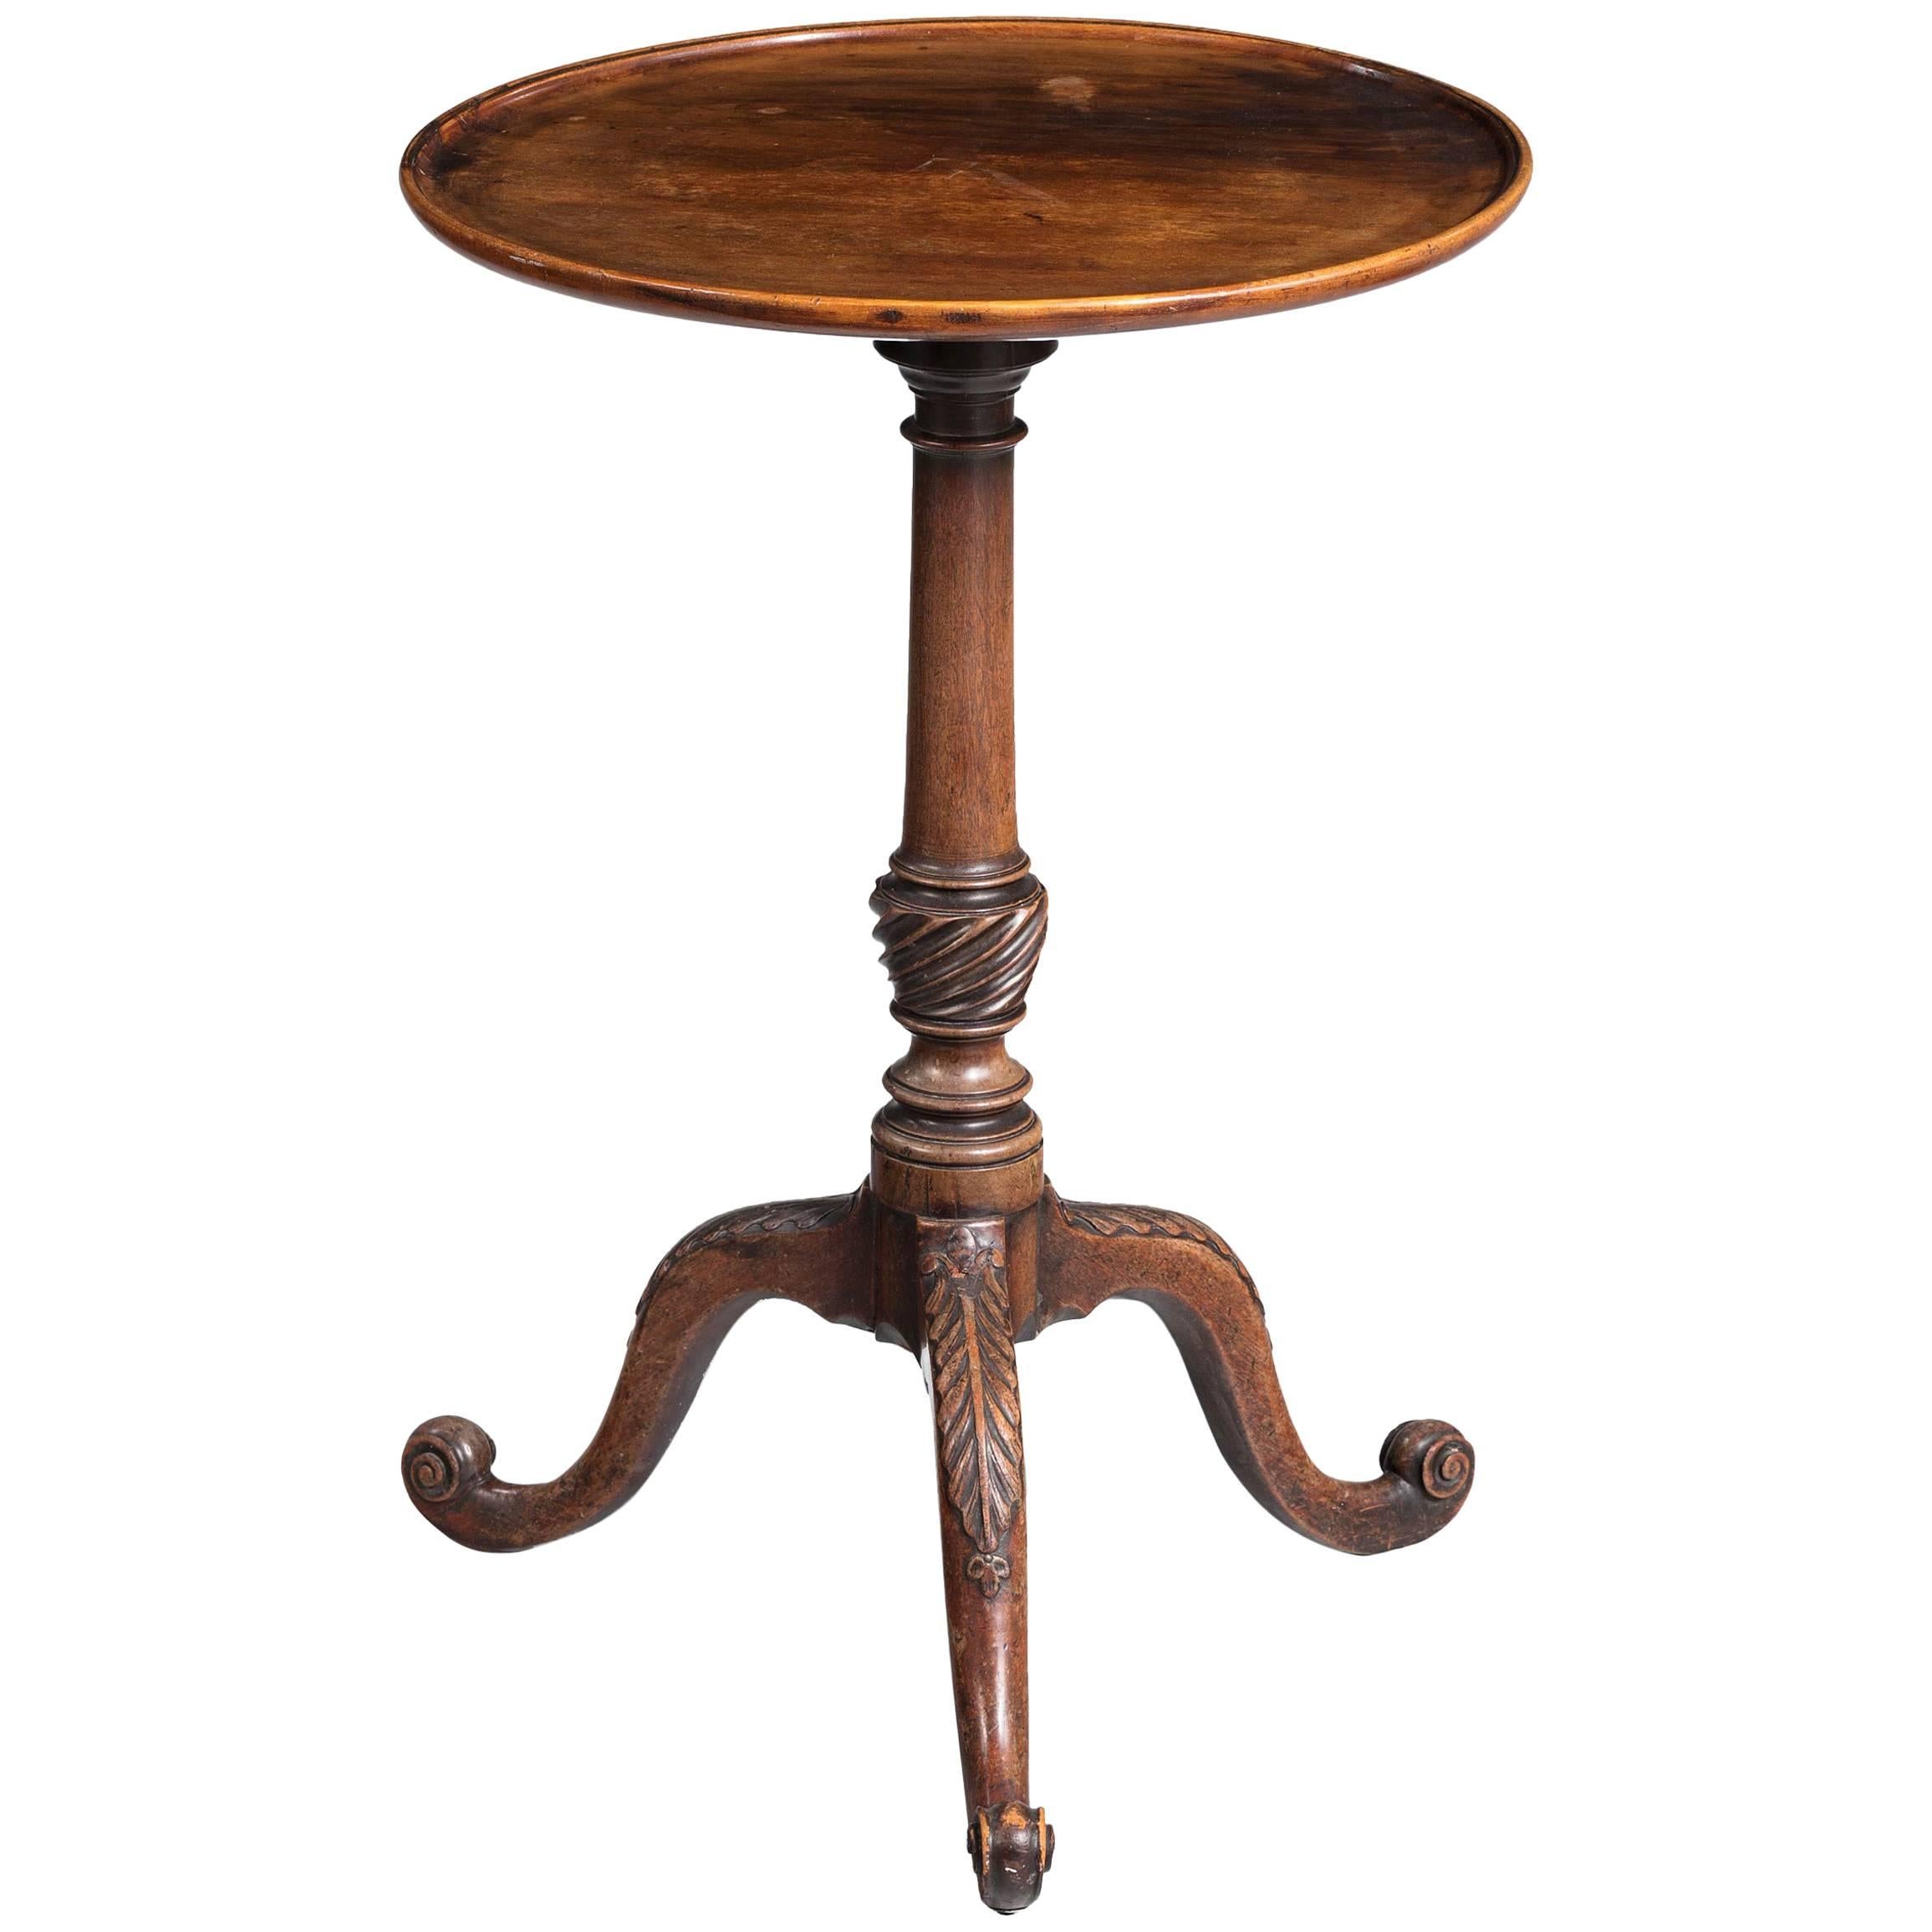 George III Period Mahogany Dish Top Tripod Table on Scrolled Toes